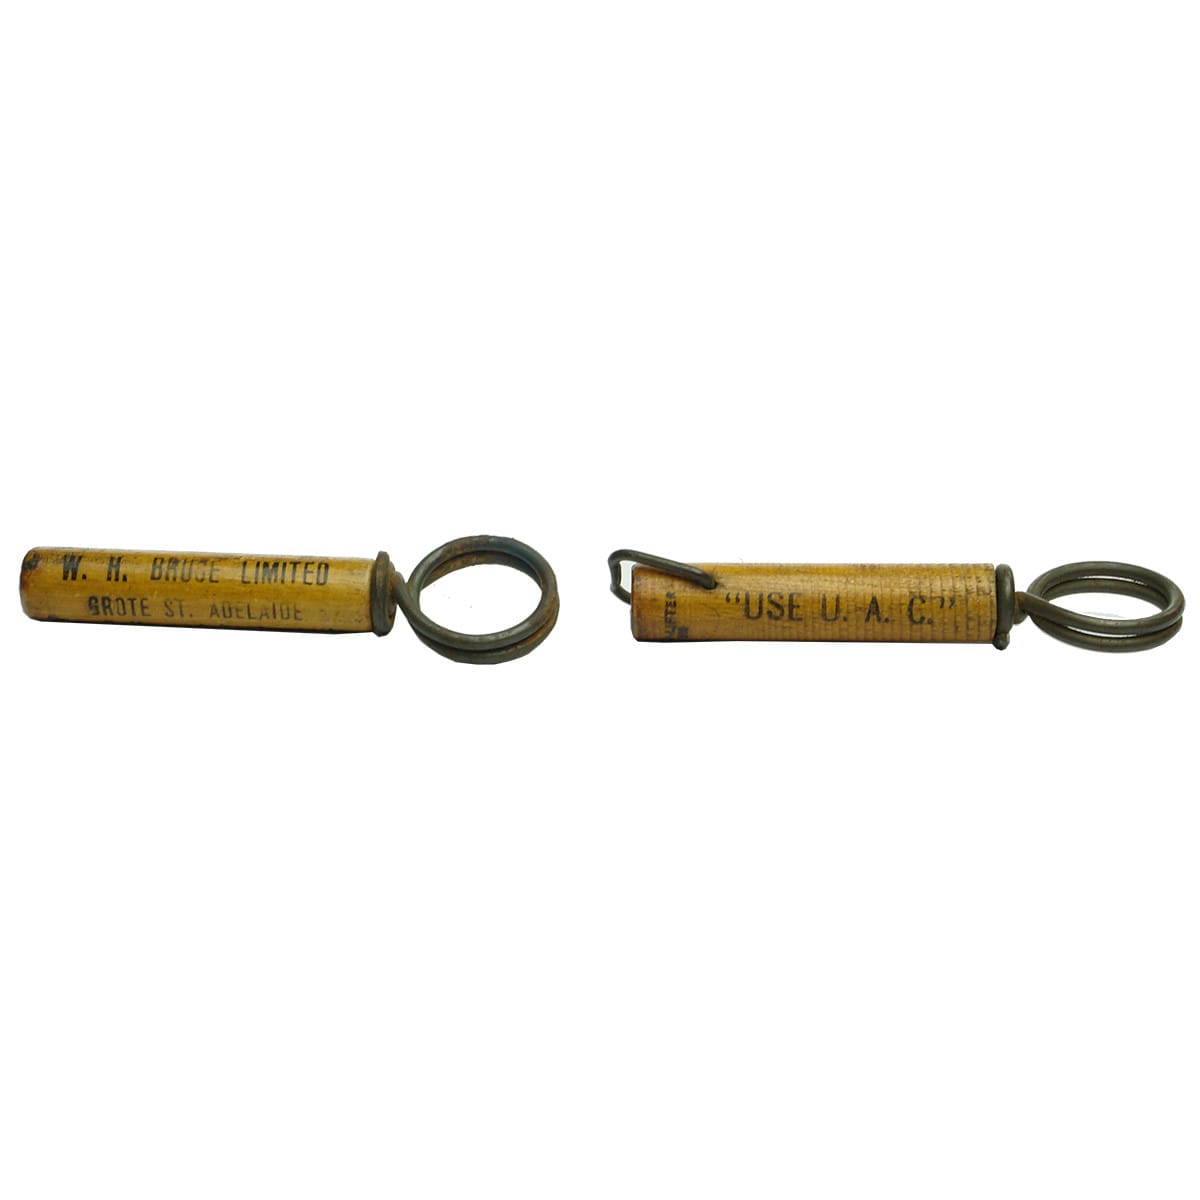 Two promotional corkscrews with wooden covers: W. H. Bruce Ltd, Adelaide and Use U. A. C. Upton's Ammonia Cleaner.